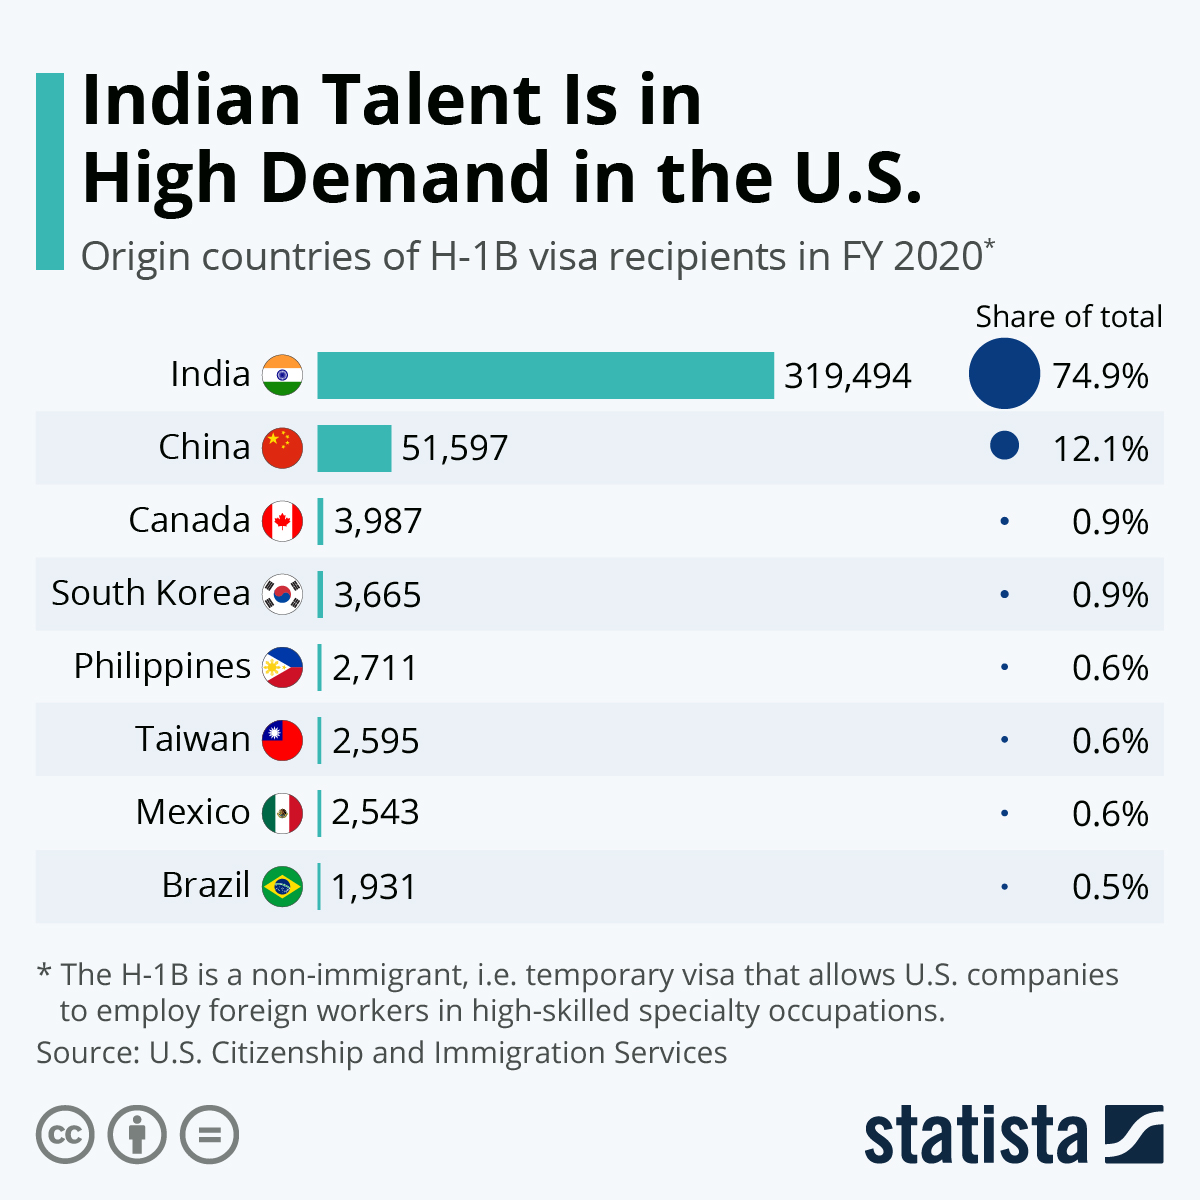 Indian Talent Is in High Demand in the U.S.